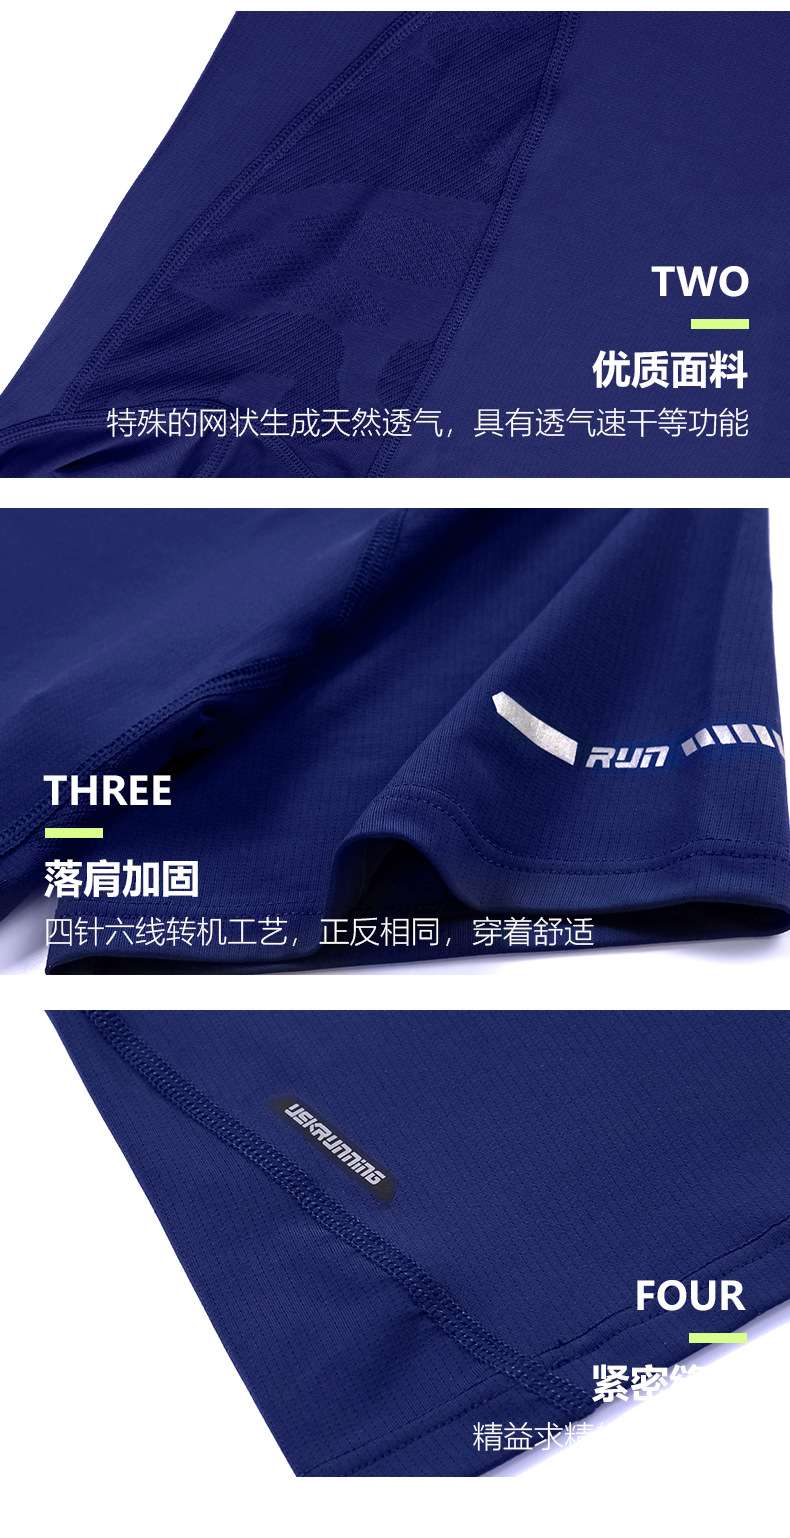 Summer sports quick-drying t-shirt men's half-sleeved men's t-shirt physical perspiration clothing solid color round neck quick-drying t-shirt advertising shirt